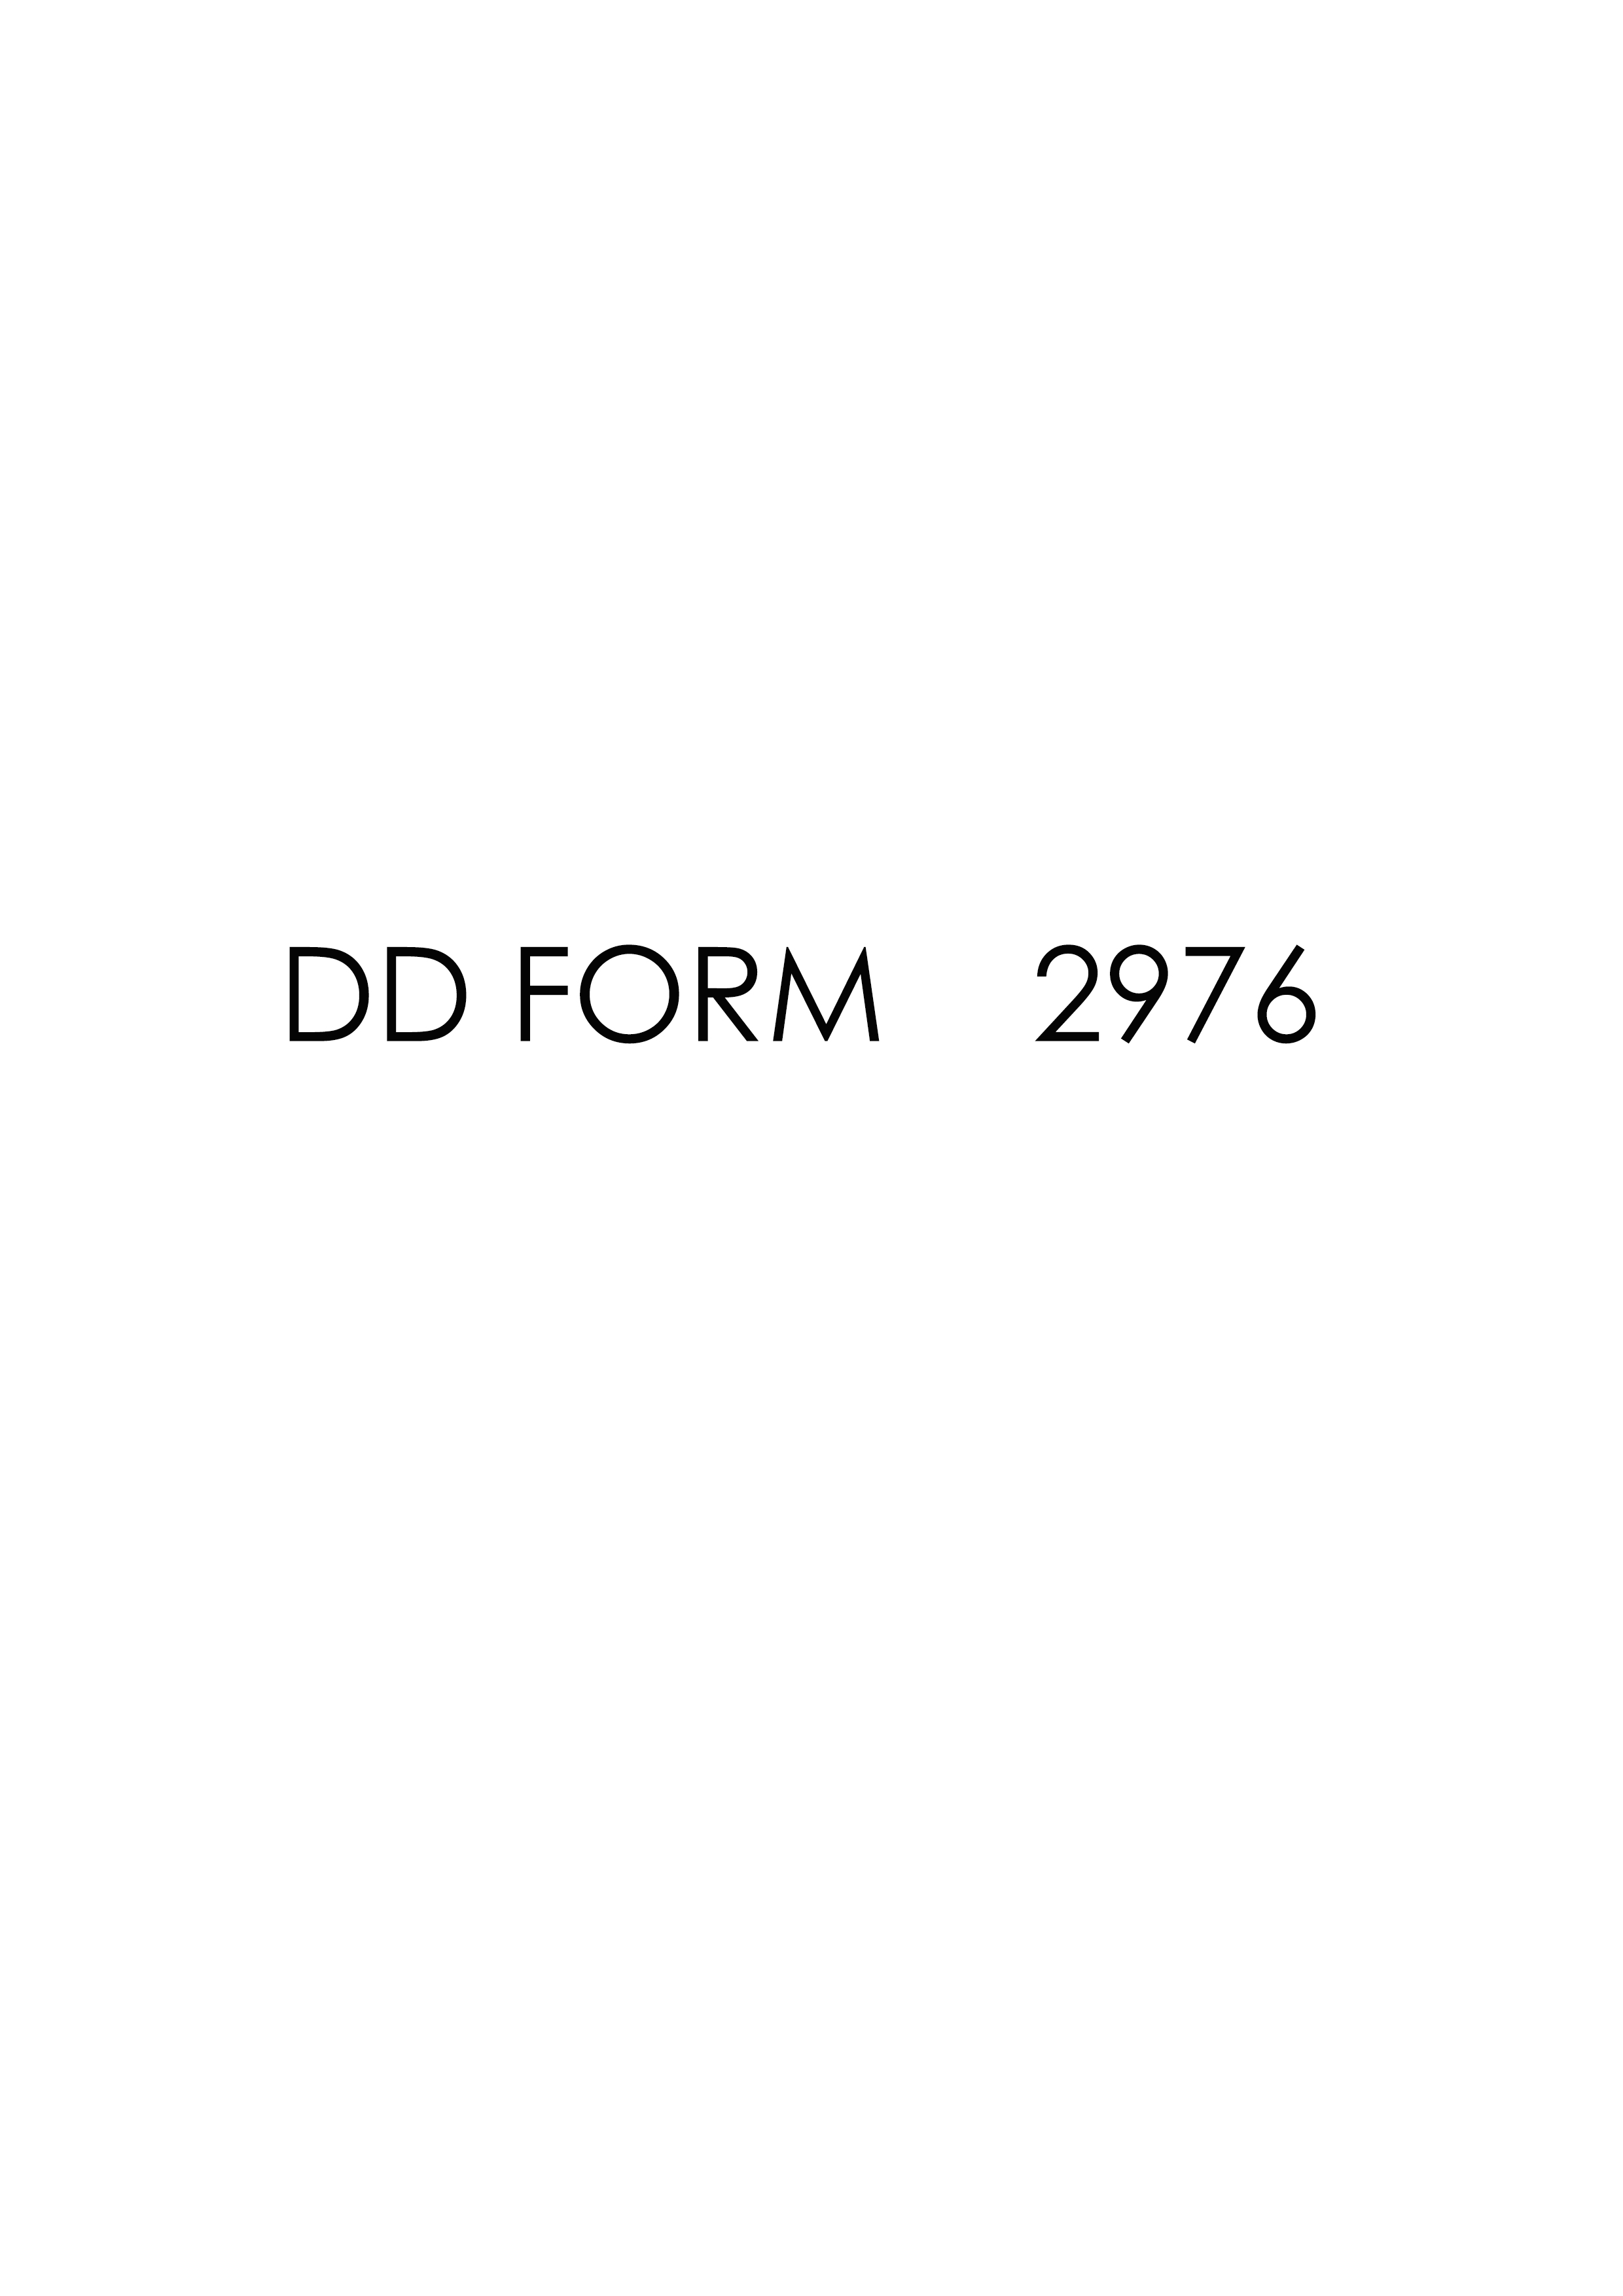 Download Fillable dd Form 2976